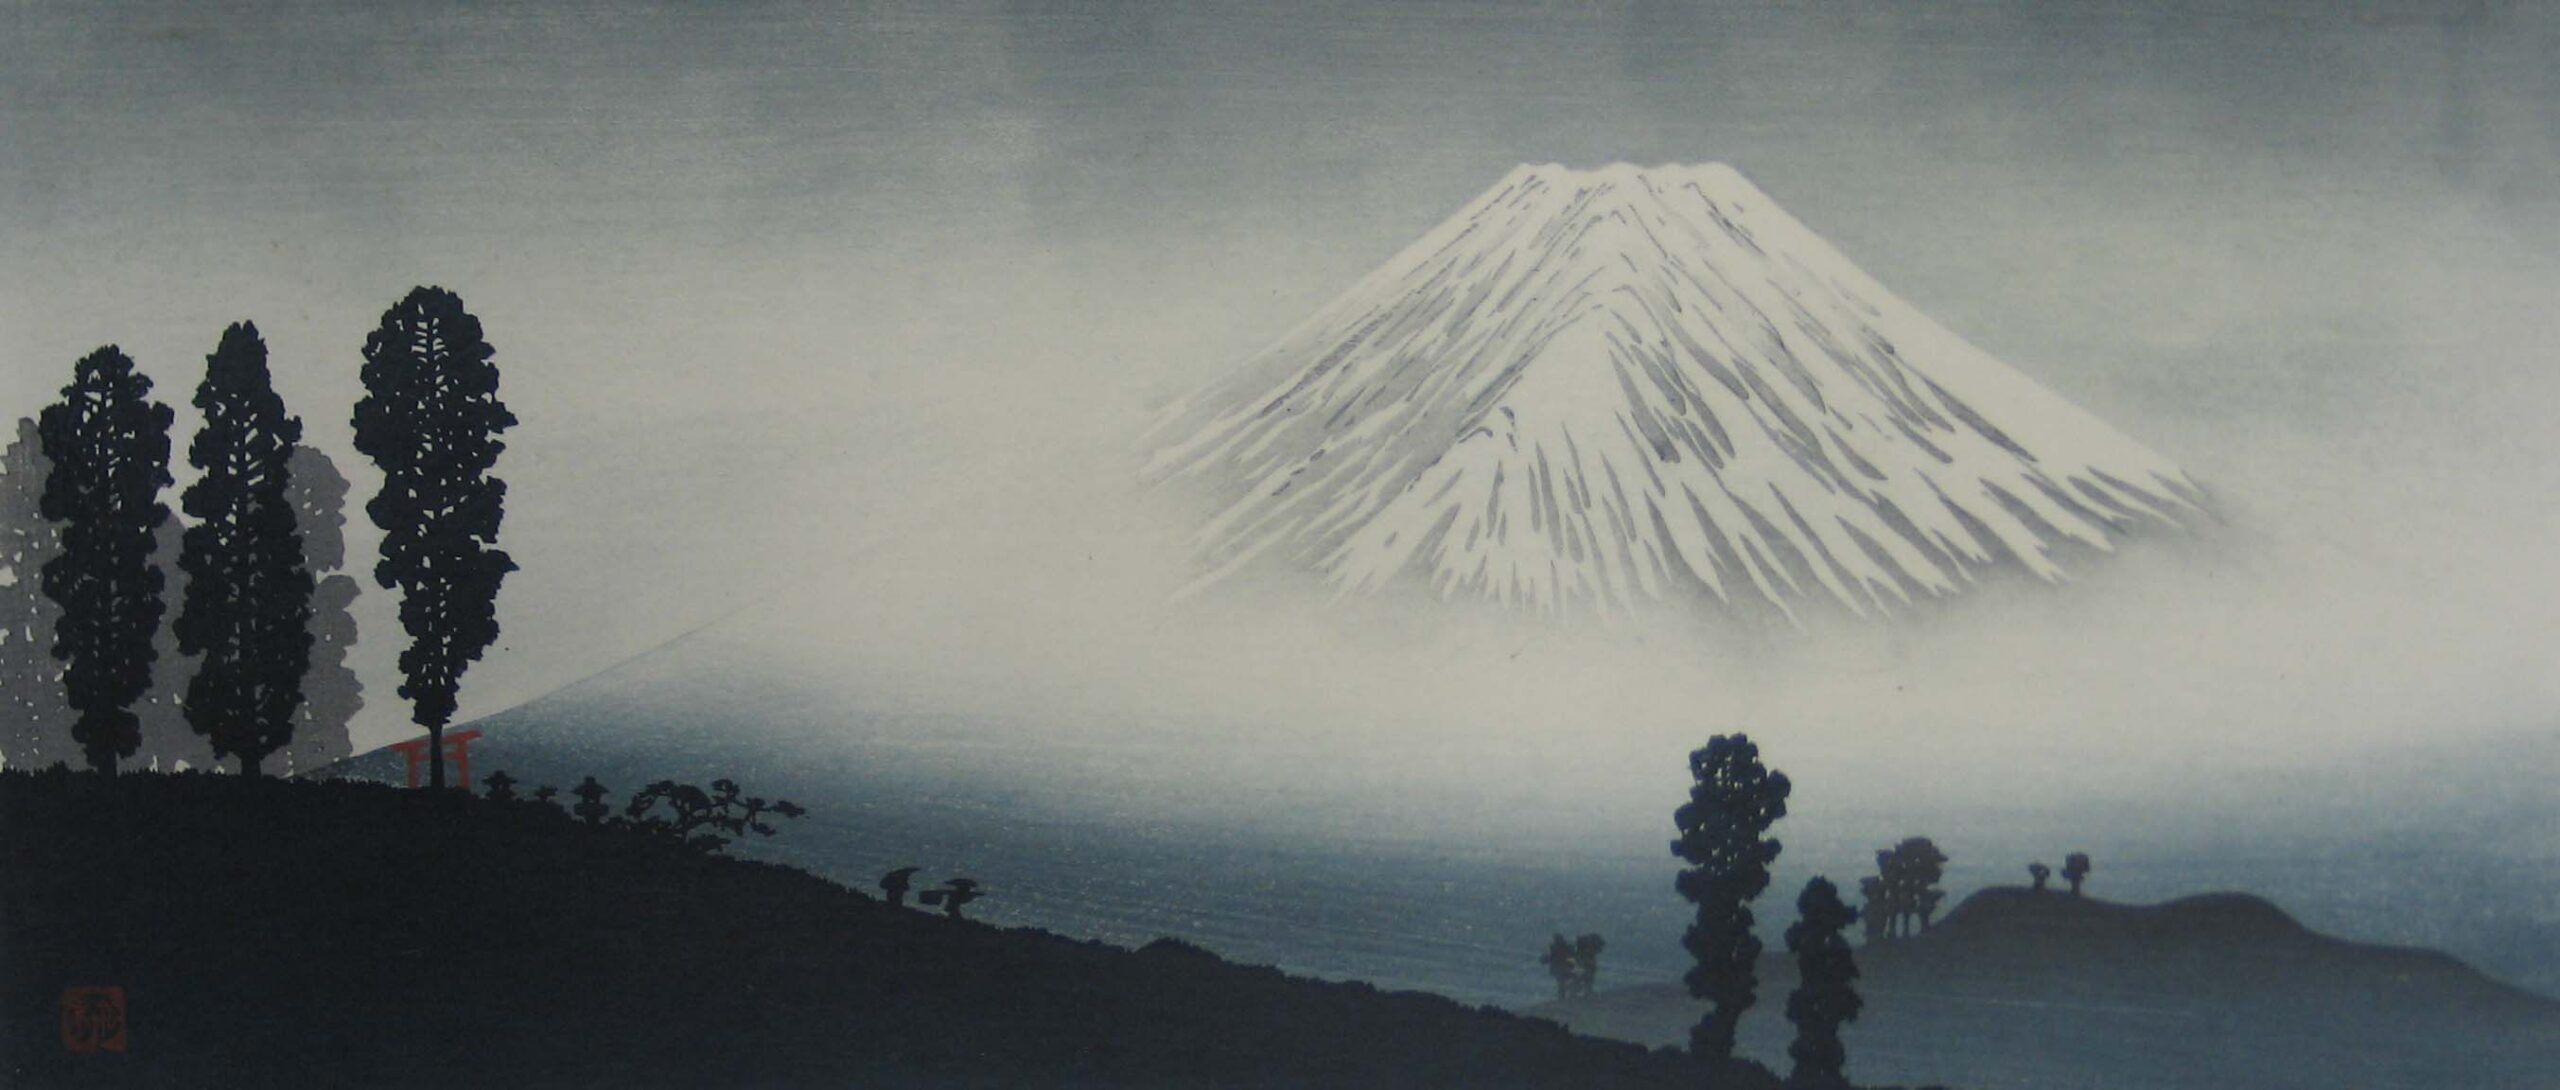 Shotei Hiroaki, Mount Fuji, c. 1920s-1930s. Woodblock print, Thomas Ewing French Collection of Prints: Bequest of Janet French Houston